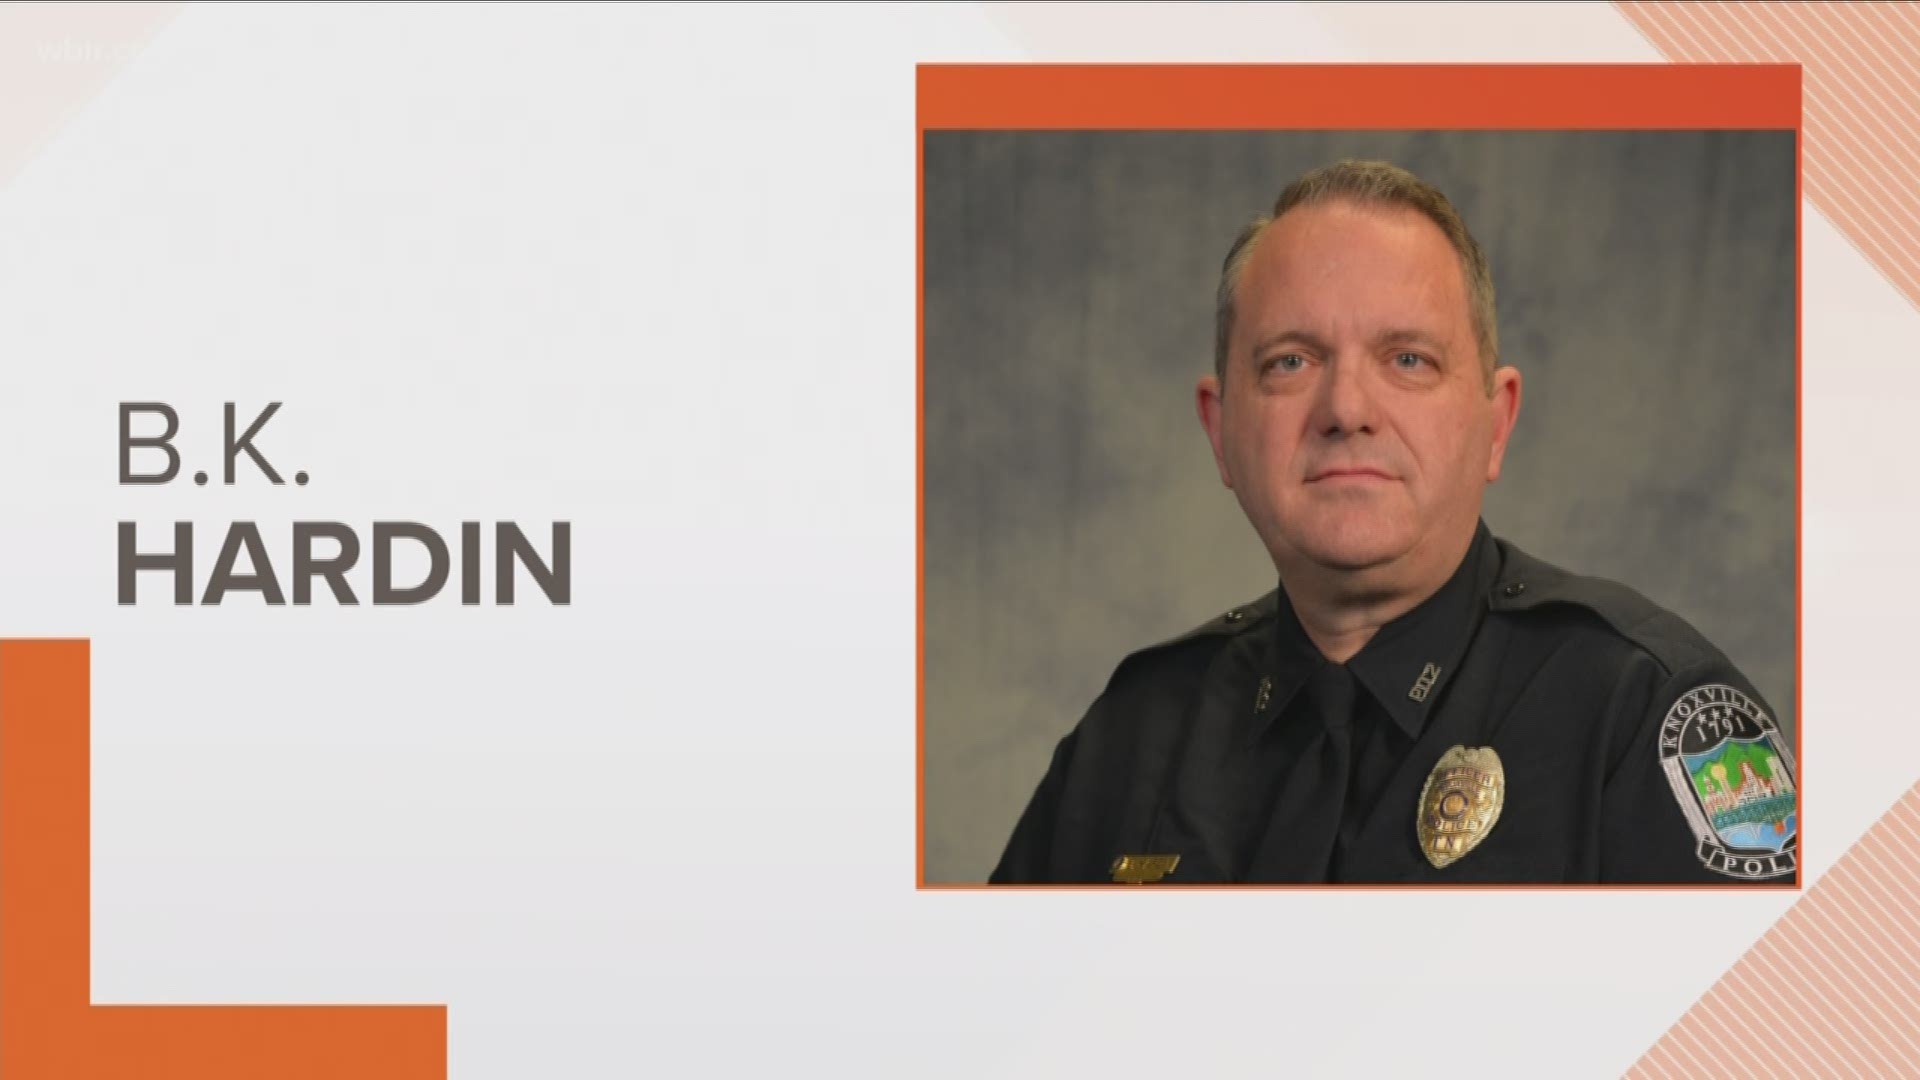 The City of Knoxville is adding money to the reward for information on who attacked a police officer.